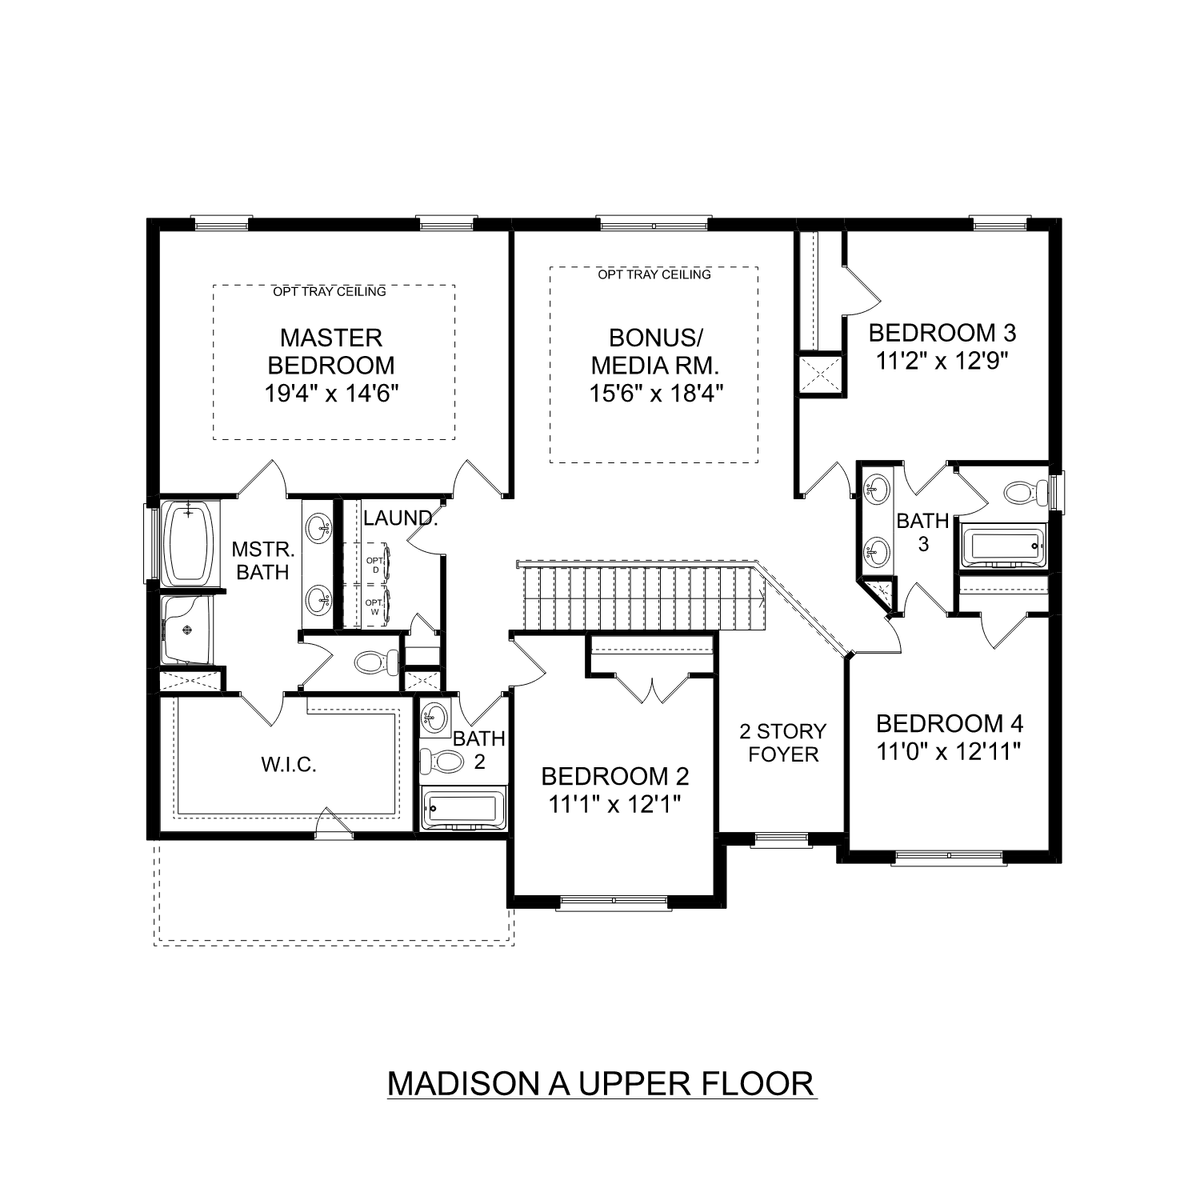 2 - The Madison A buildable floor plan layout in Davidson Homes' Pikes Ridge community.